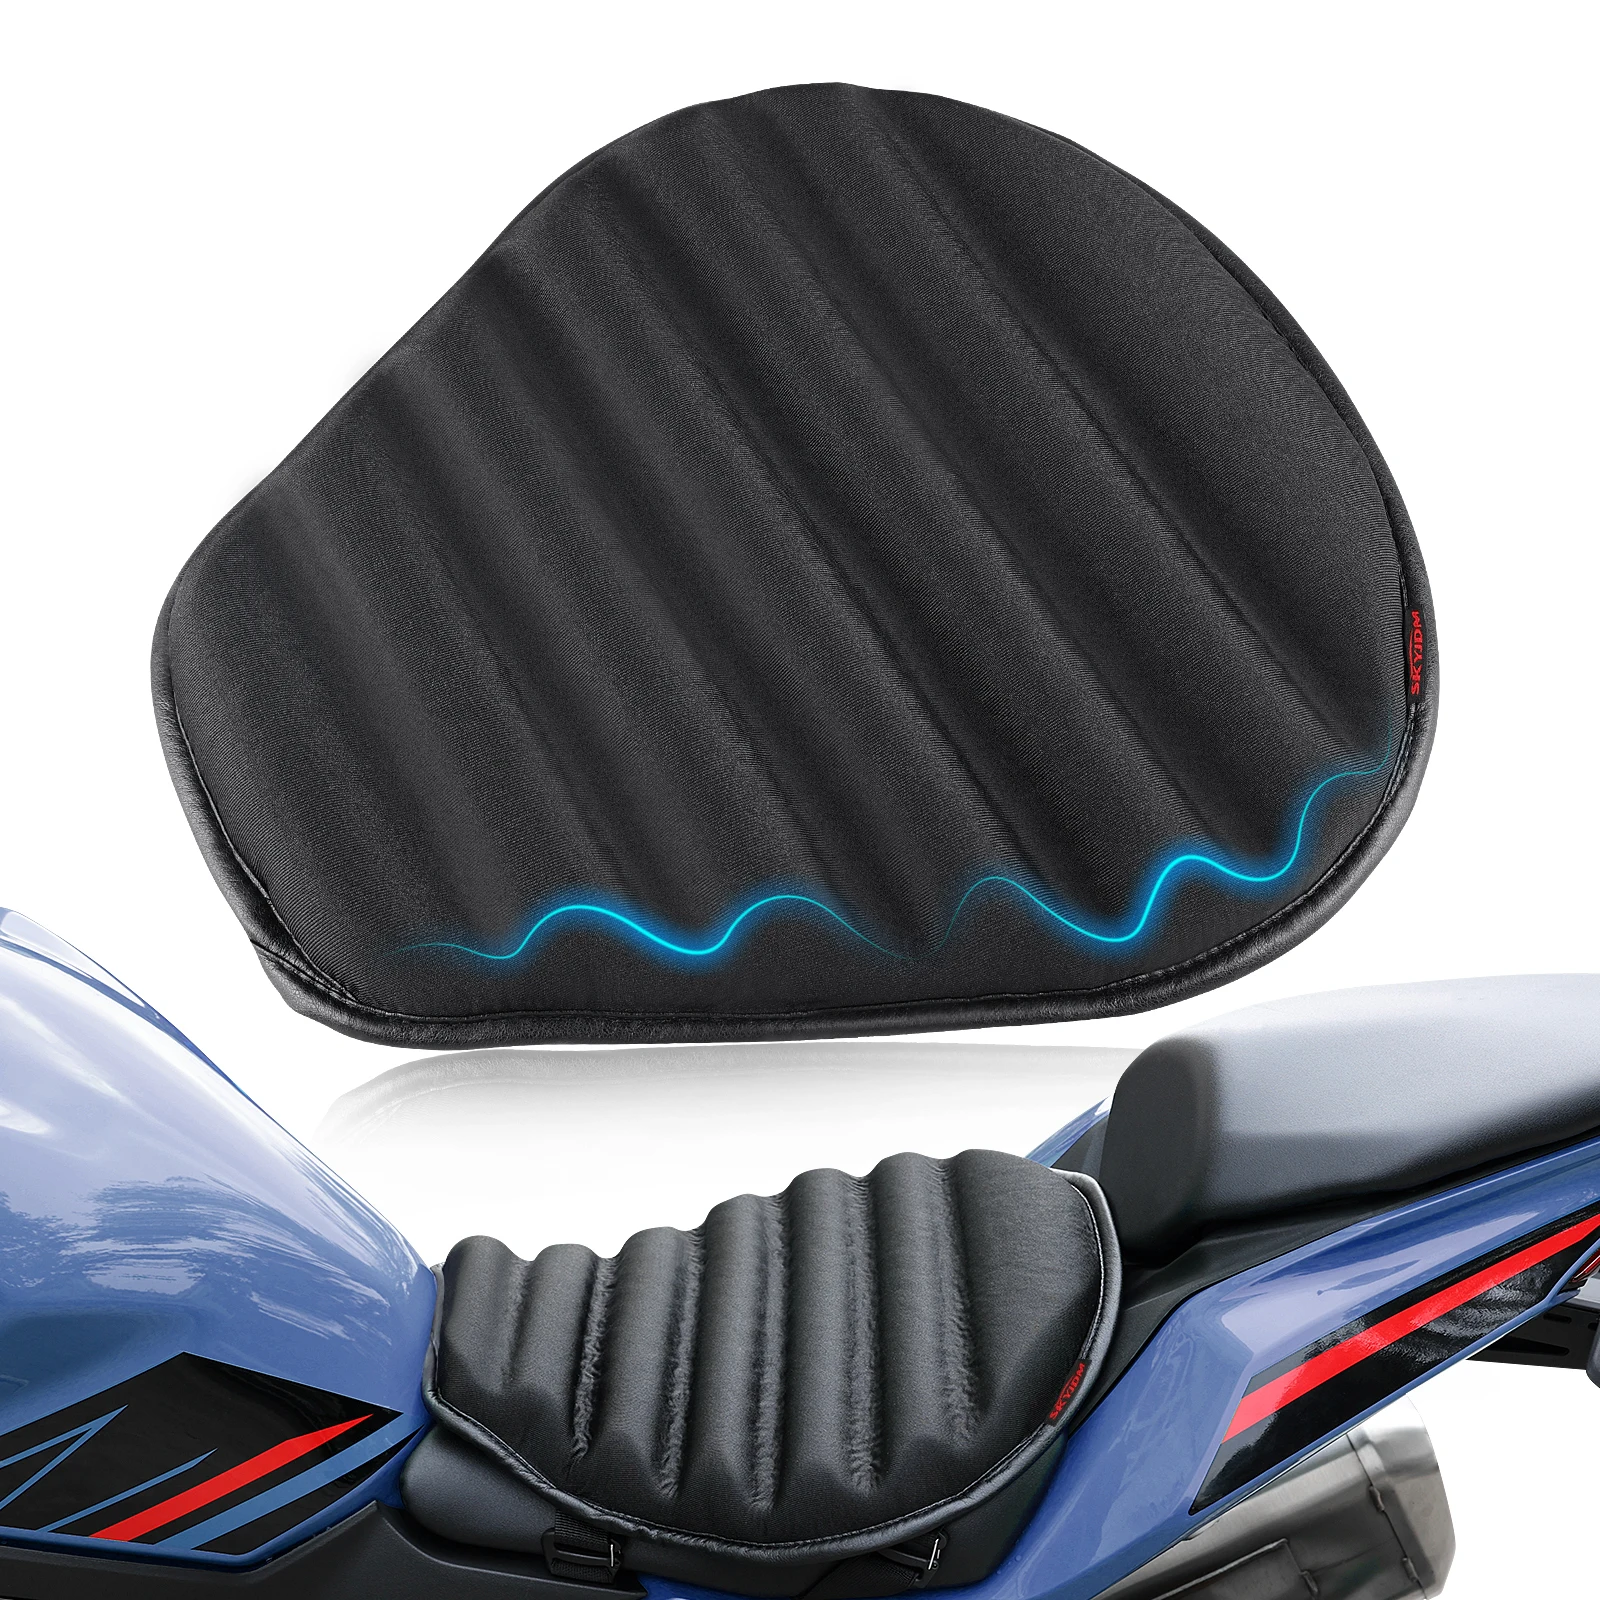 

NEW Wavy Motorcycle TPE Seat Cushion for Long Rides Anti-slip Motorcycle Seat Pad Black 3D Honeycomb Structure Shock& Breathable